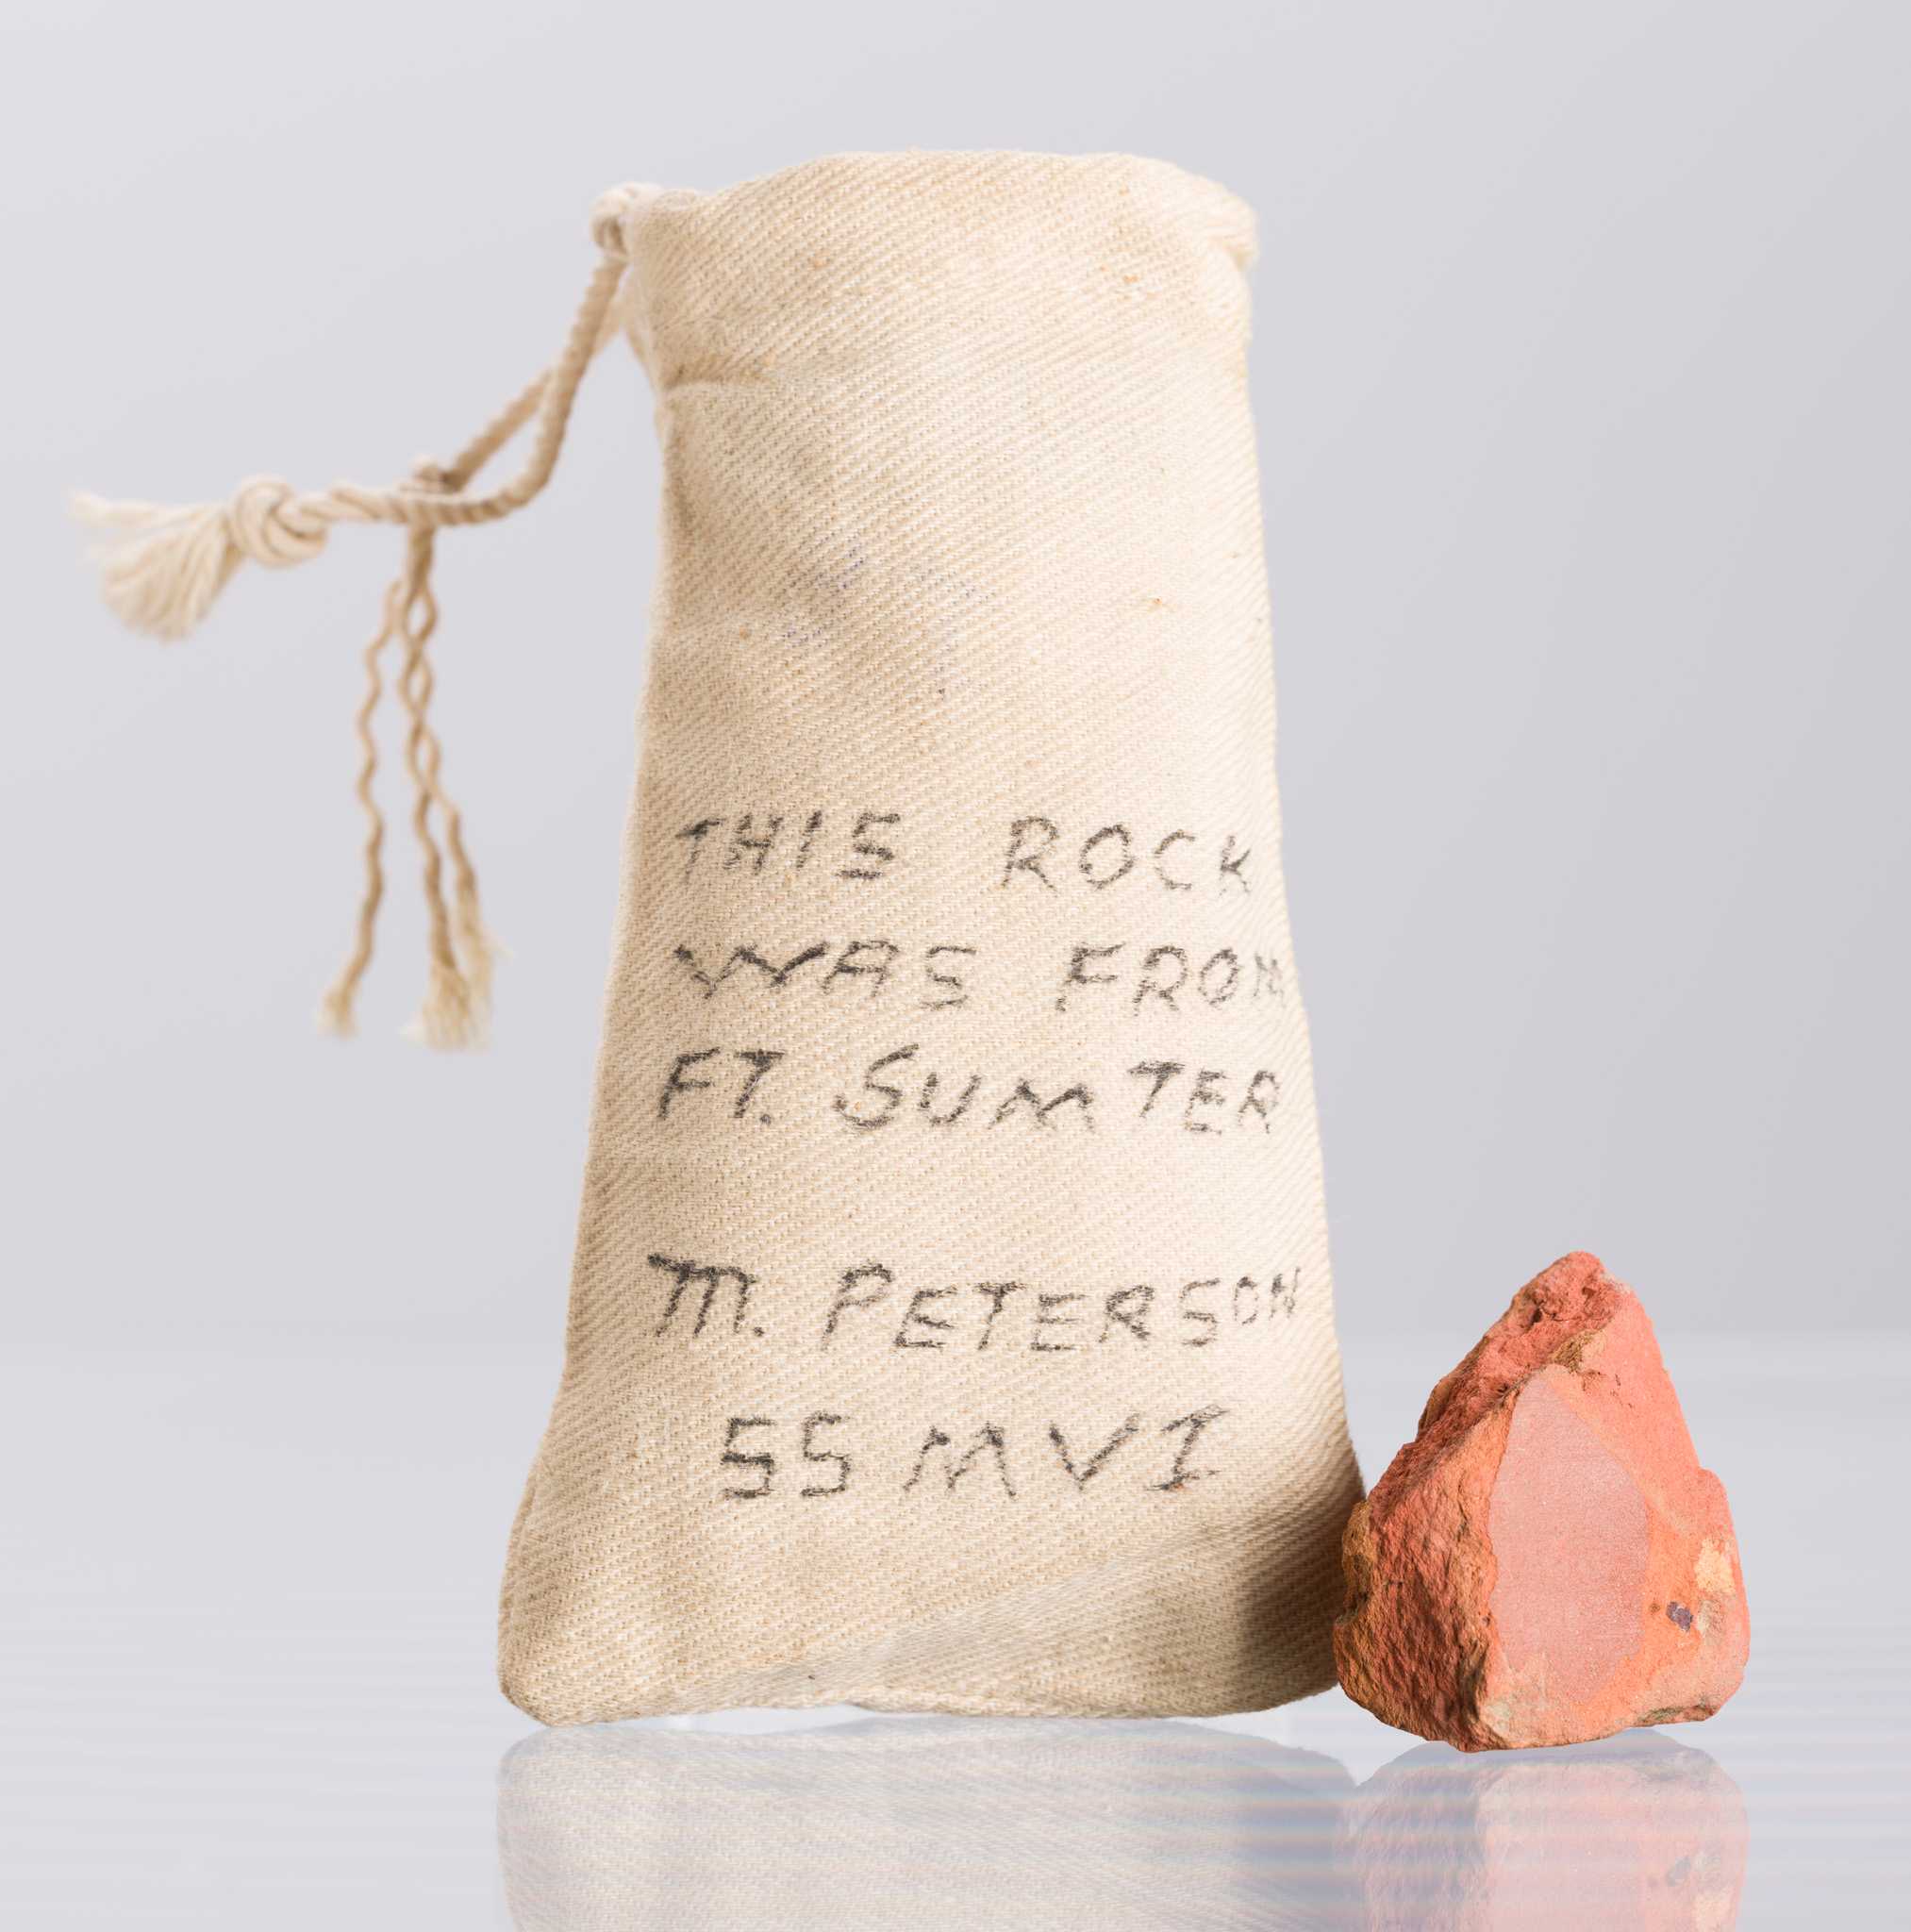 A cotton bag (2017.78.2a) containing a piece of brick (2017.78.2b) from Fort Sumter owned by Marquis Peterson. The bag is brownish white and has a braided drawstring at top. Hand written in black ink on the front of the bag is “THIS ROCK / WAS FROM / FT. SUMTER / M. PETERSON / 55 MVI.” The brick is reddish brown and is flat on the top and bottom. The four sides are irregular in shape and rough. The brick piece has several cracks throughout.